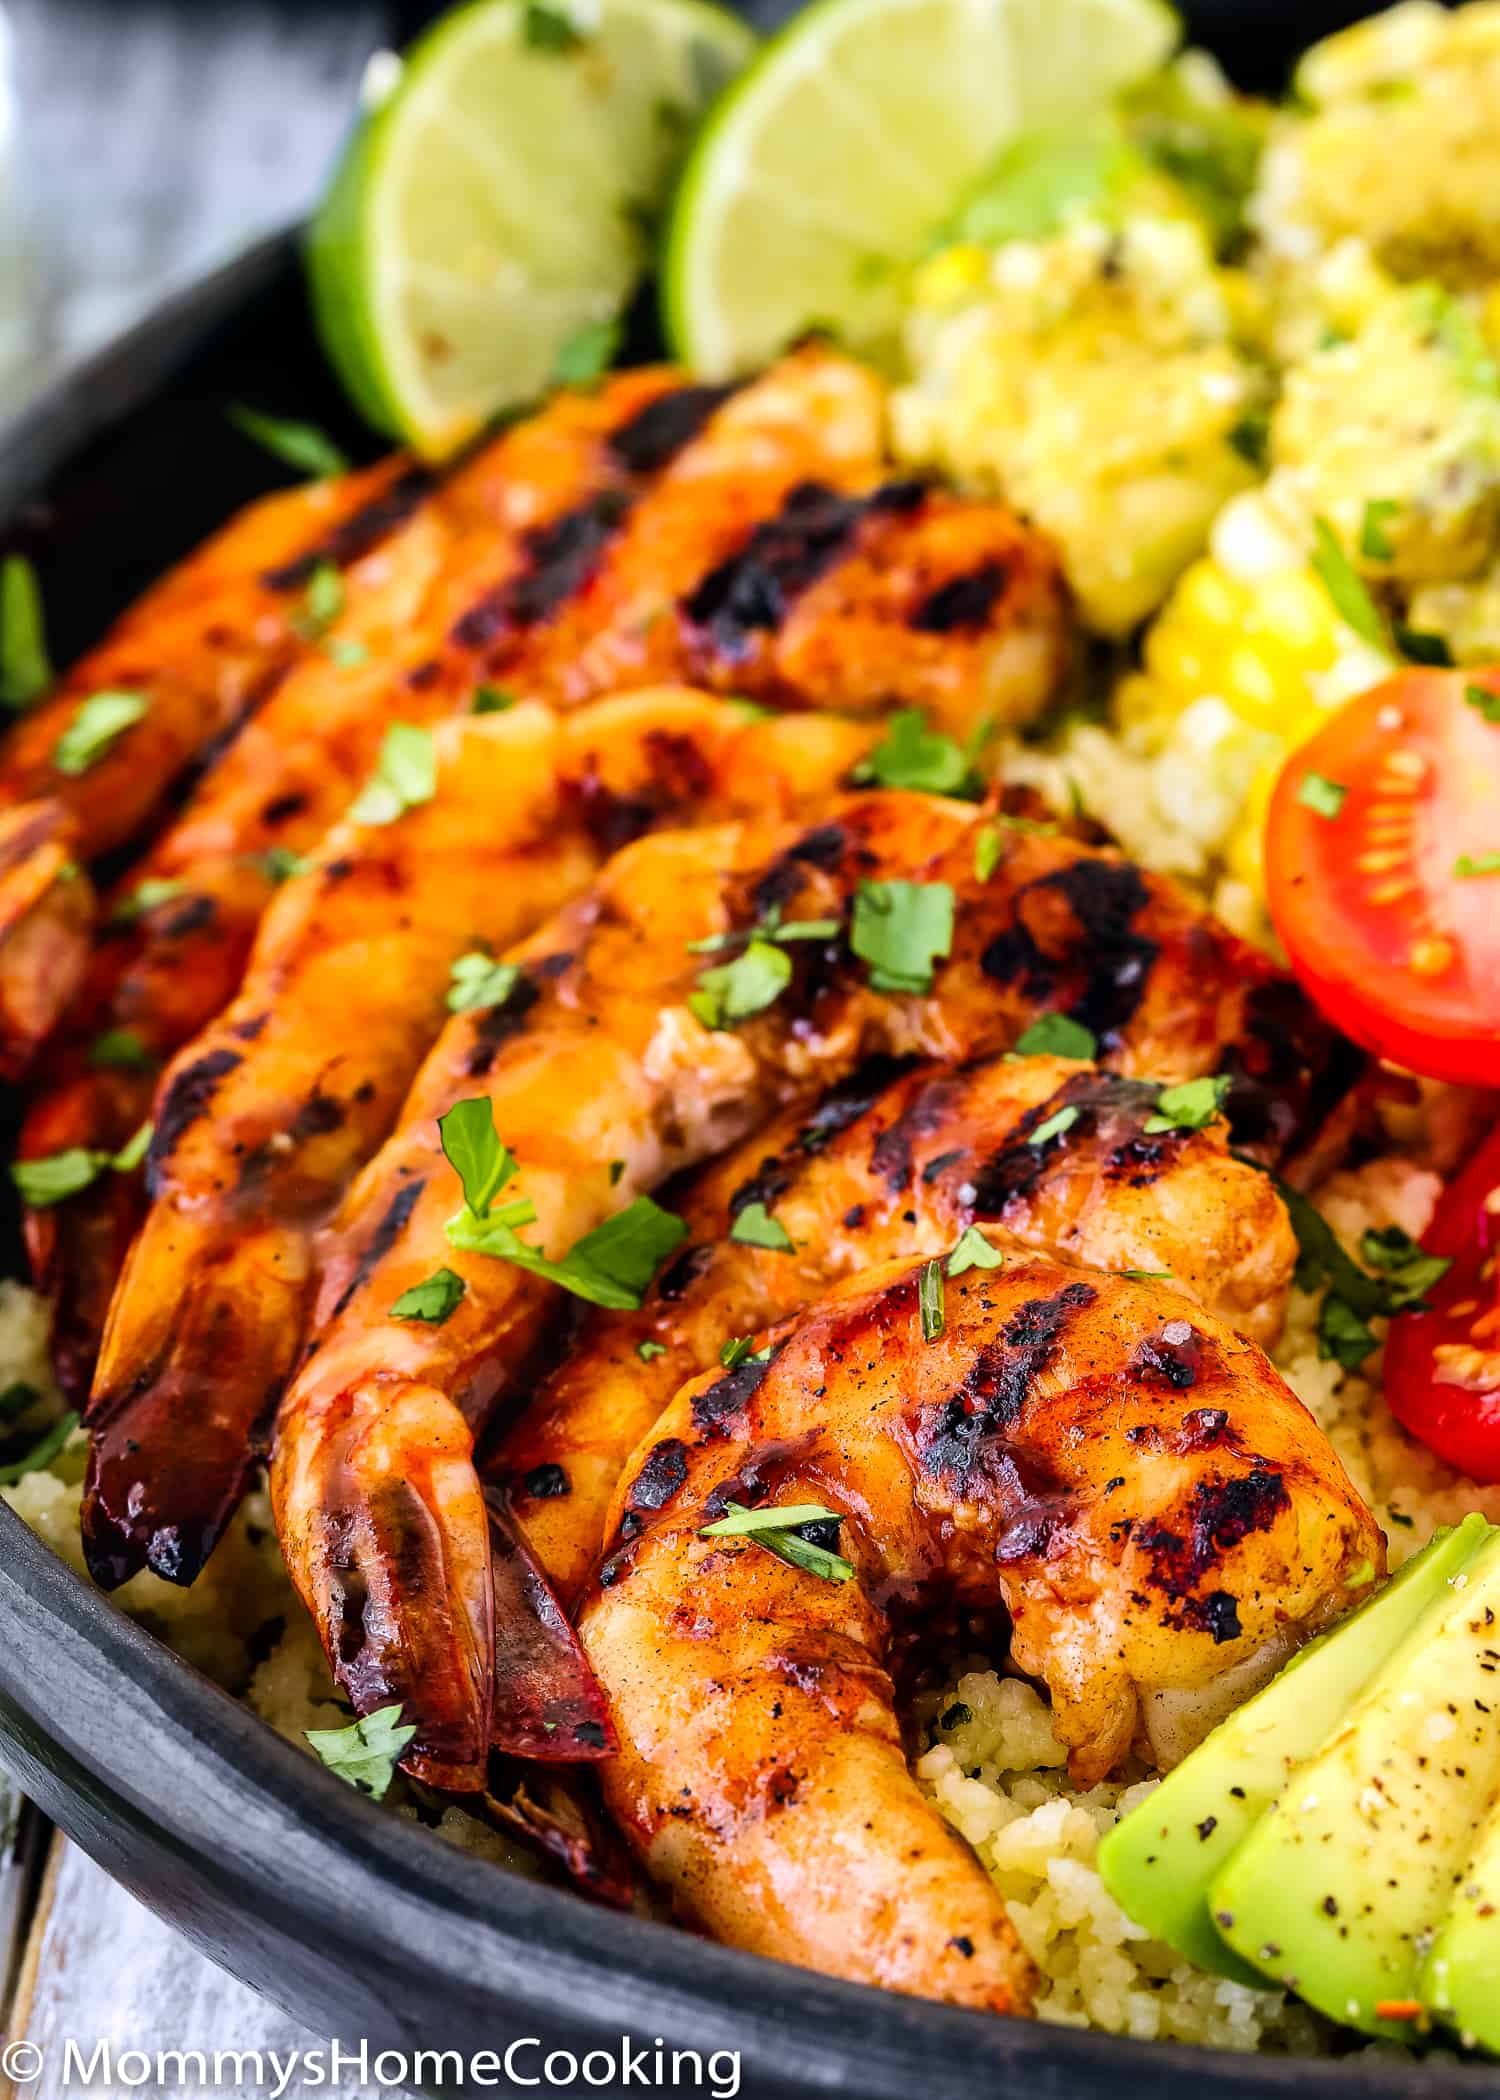 Grilled Barbecue Shrimp and Corn Avocado Salad Bowls | Mommy's Home Cooking